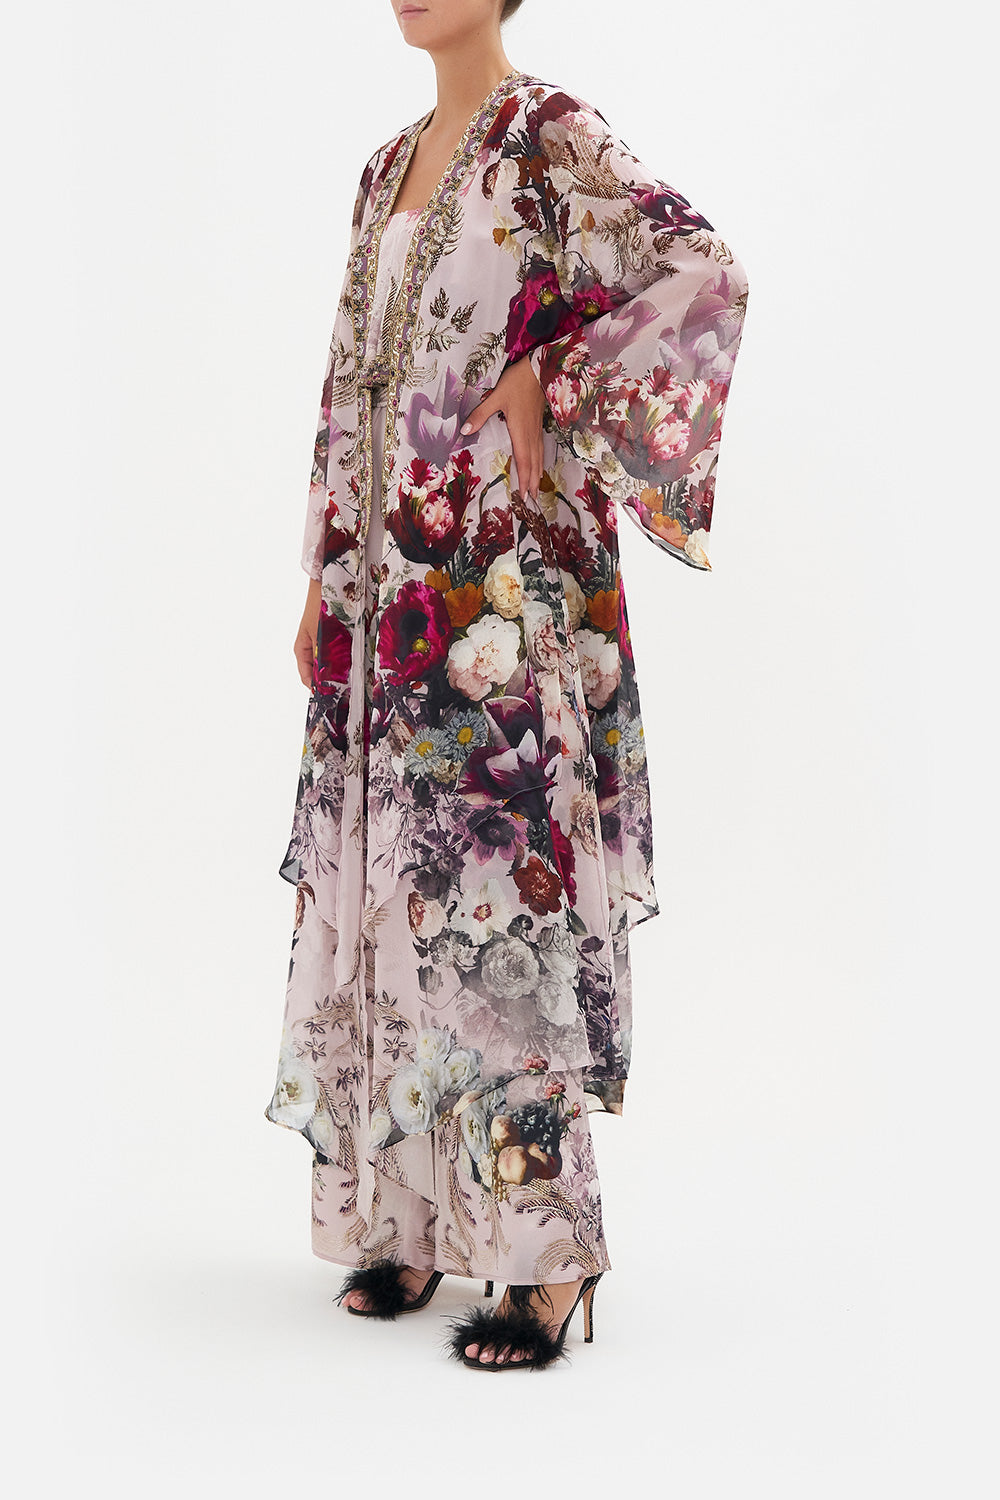 ROBE WITH DOUBLE LAYERED HEM GYPSY ROSE